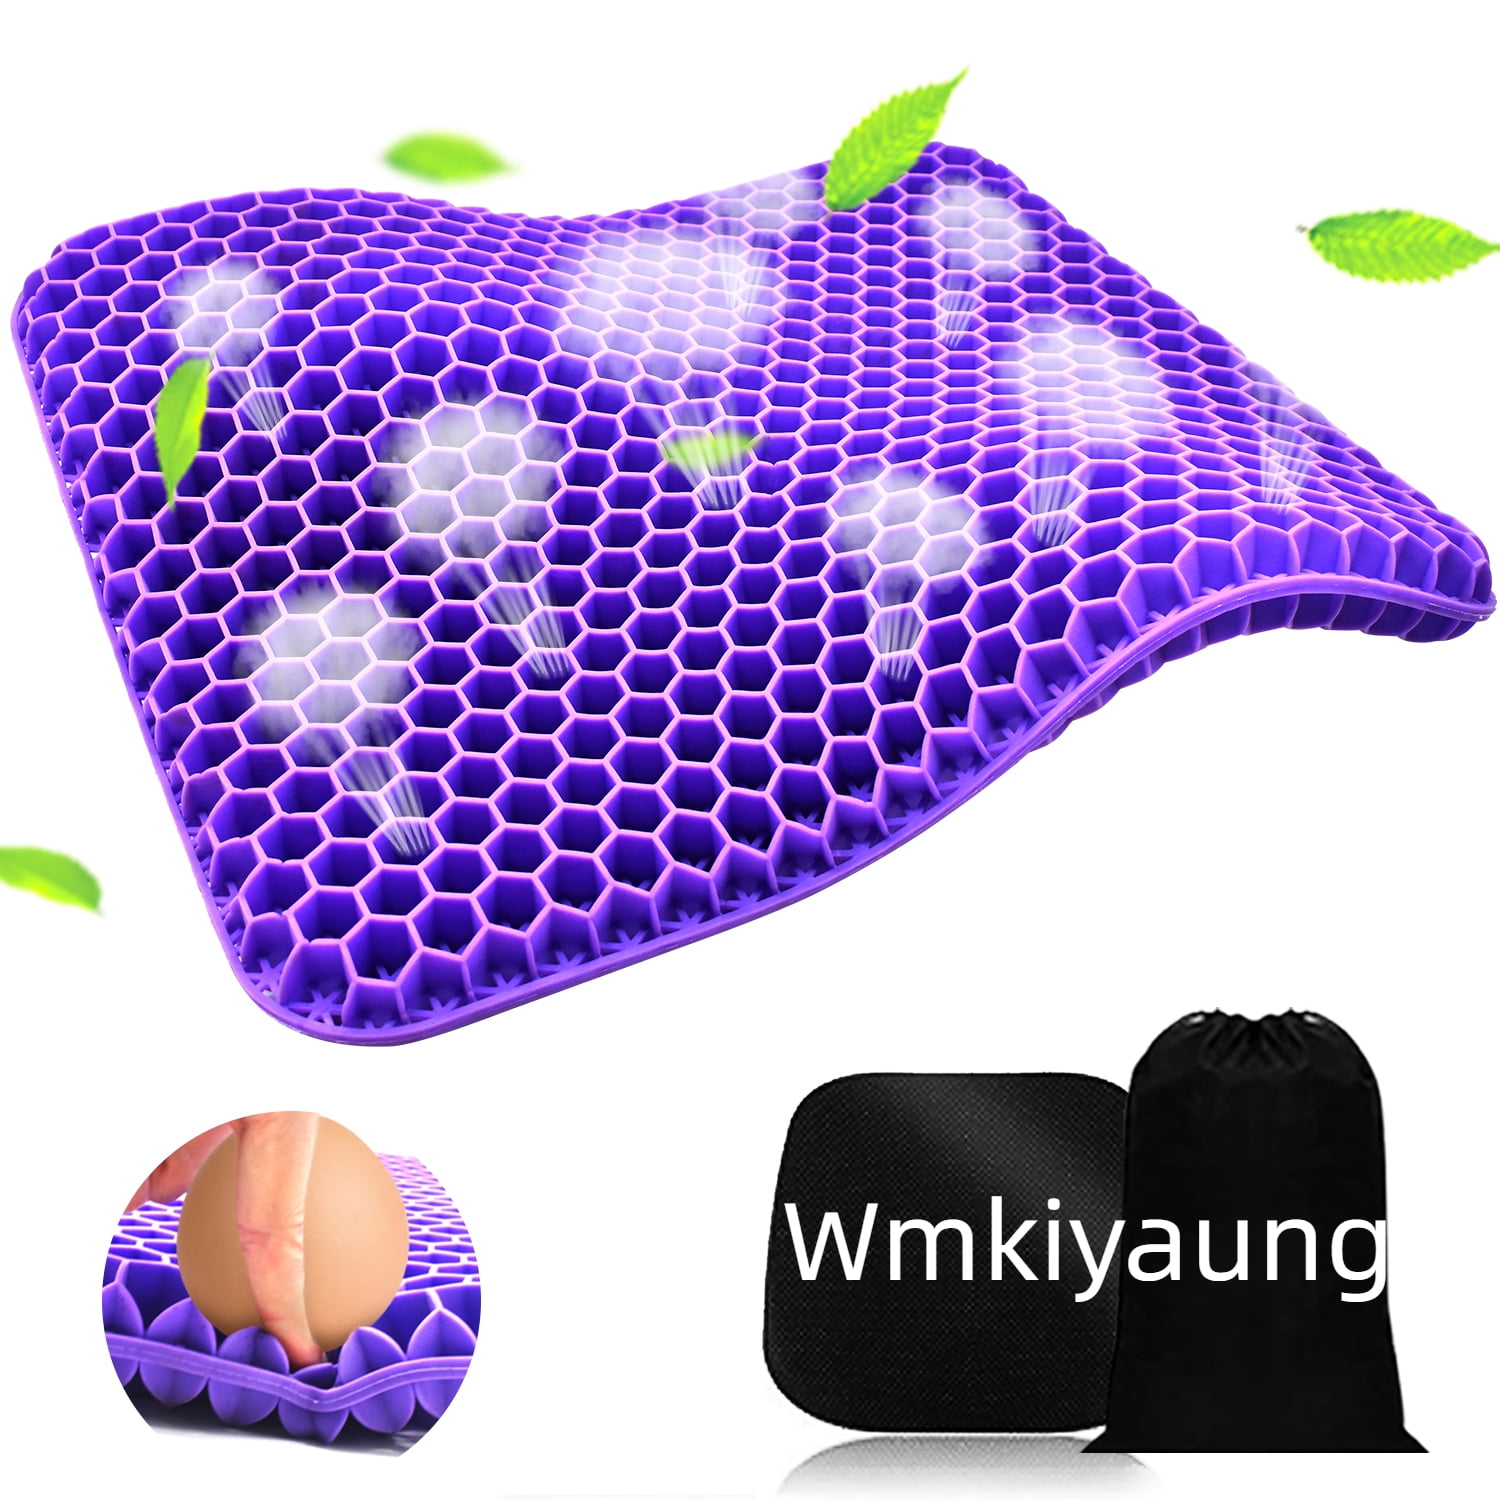 Gulymm Gel Seat Cushion for Long Sitting, Double Thick Seat Cushion with  Non-Slip Cover, Gel Cushion for Pressure Sores Breathable Honeycomb Cushion